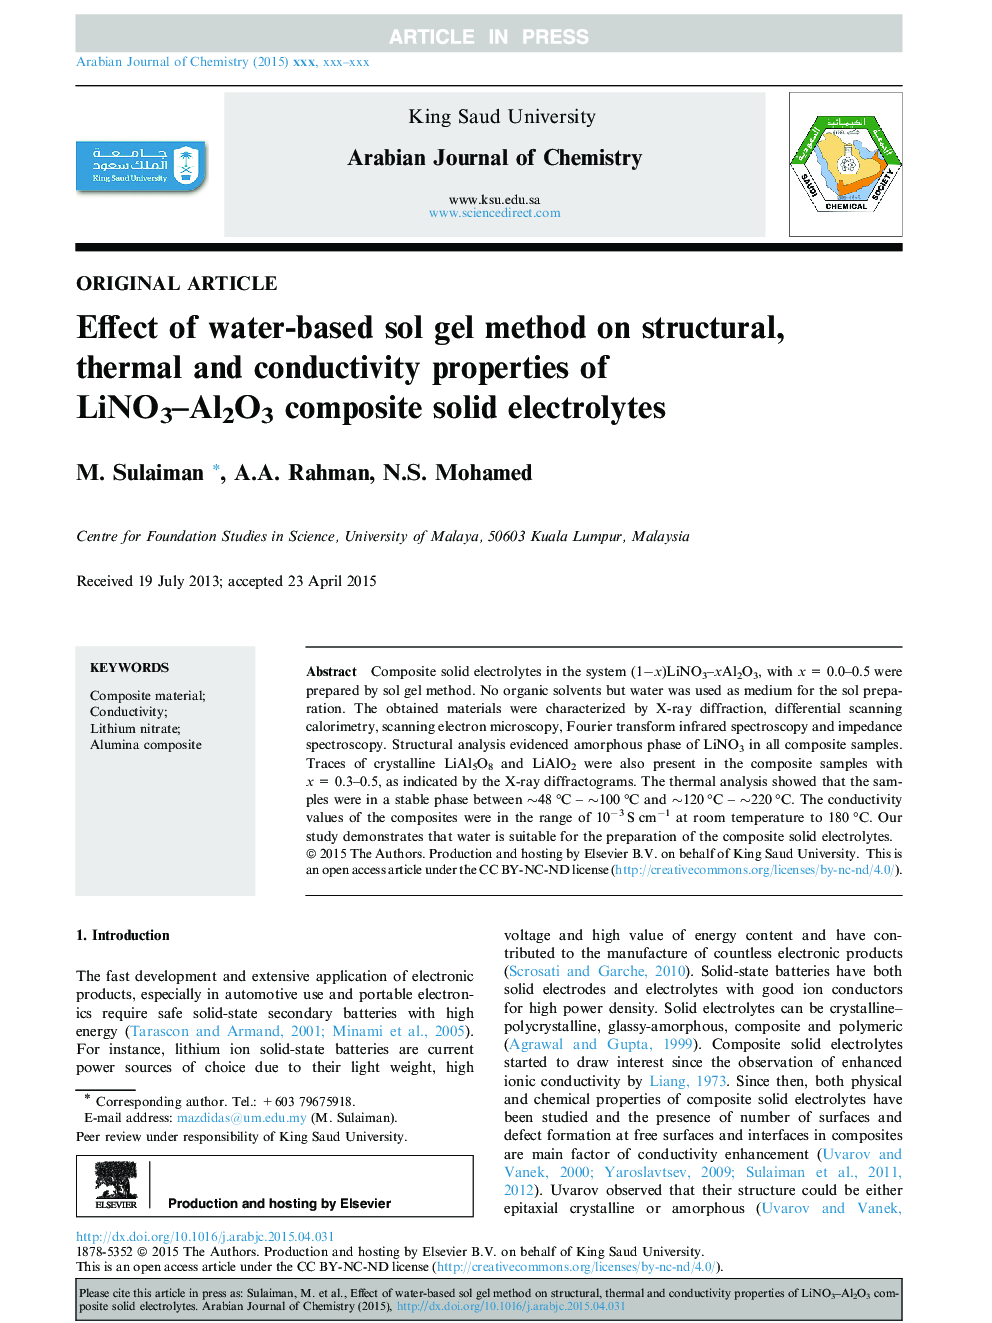 Effect of water-based sol gel method on structural, thermal and conductivity properties of LiNO3-Al2O3 composite solid electrolytes